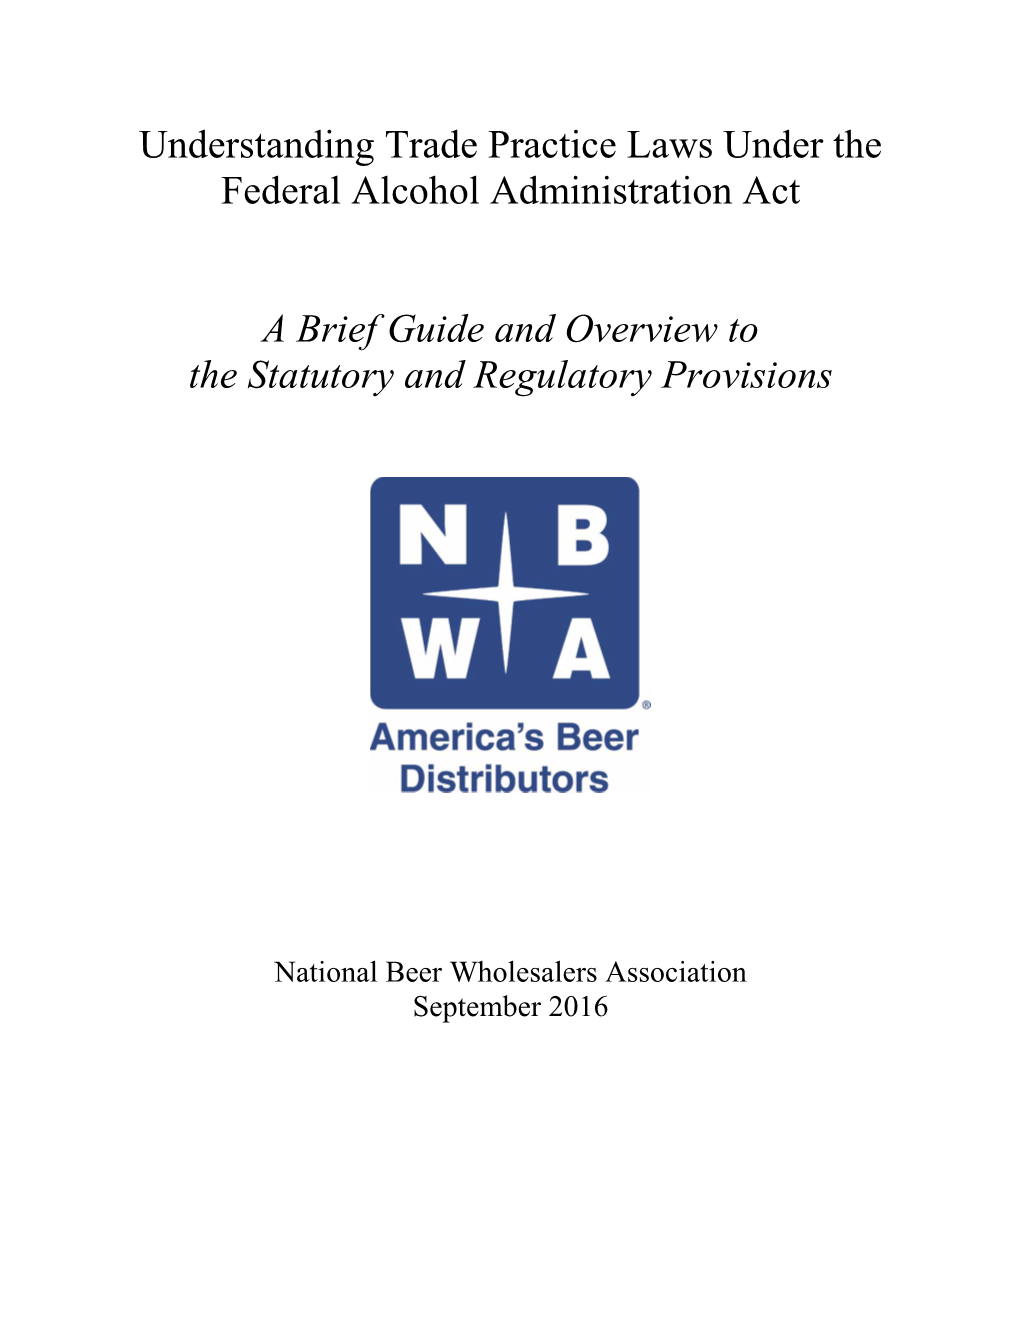 Understanding Trade Practice Laws Under the Federal Alcohol Administration Act